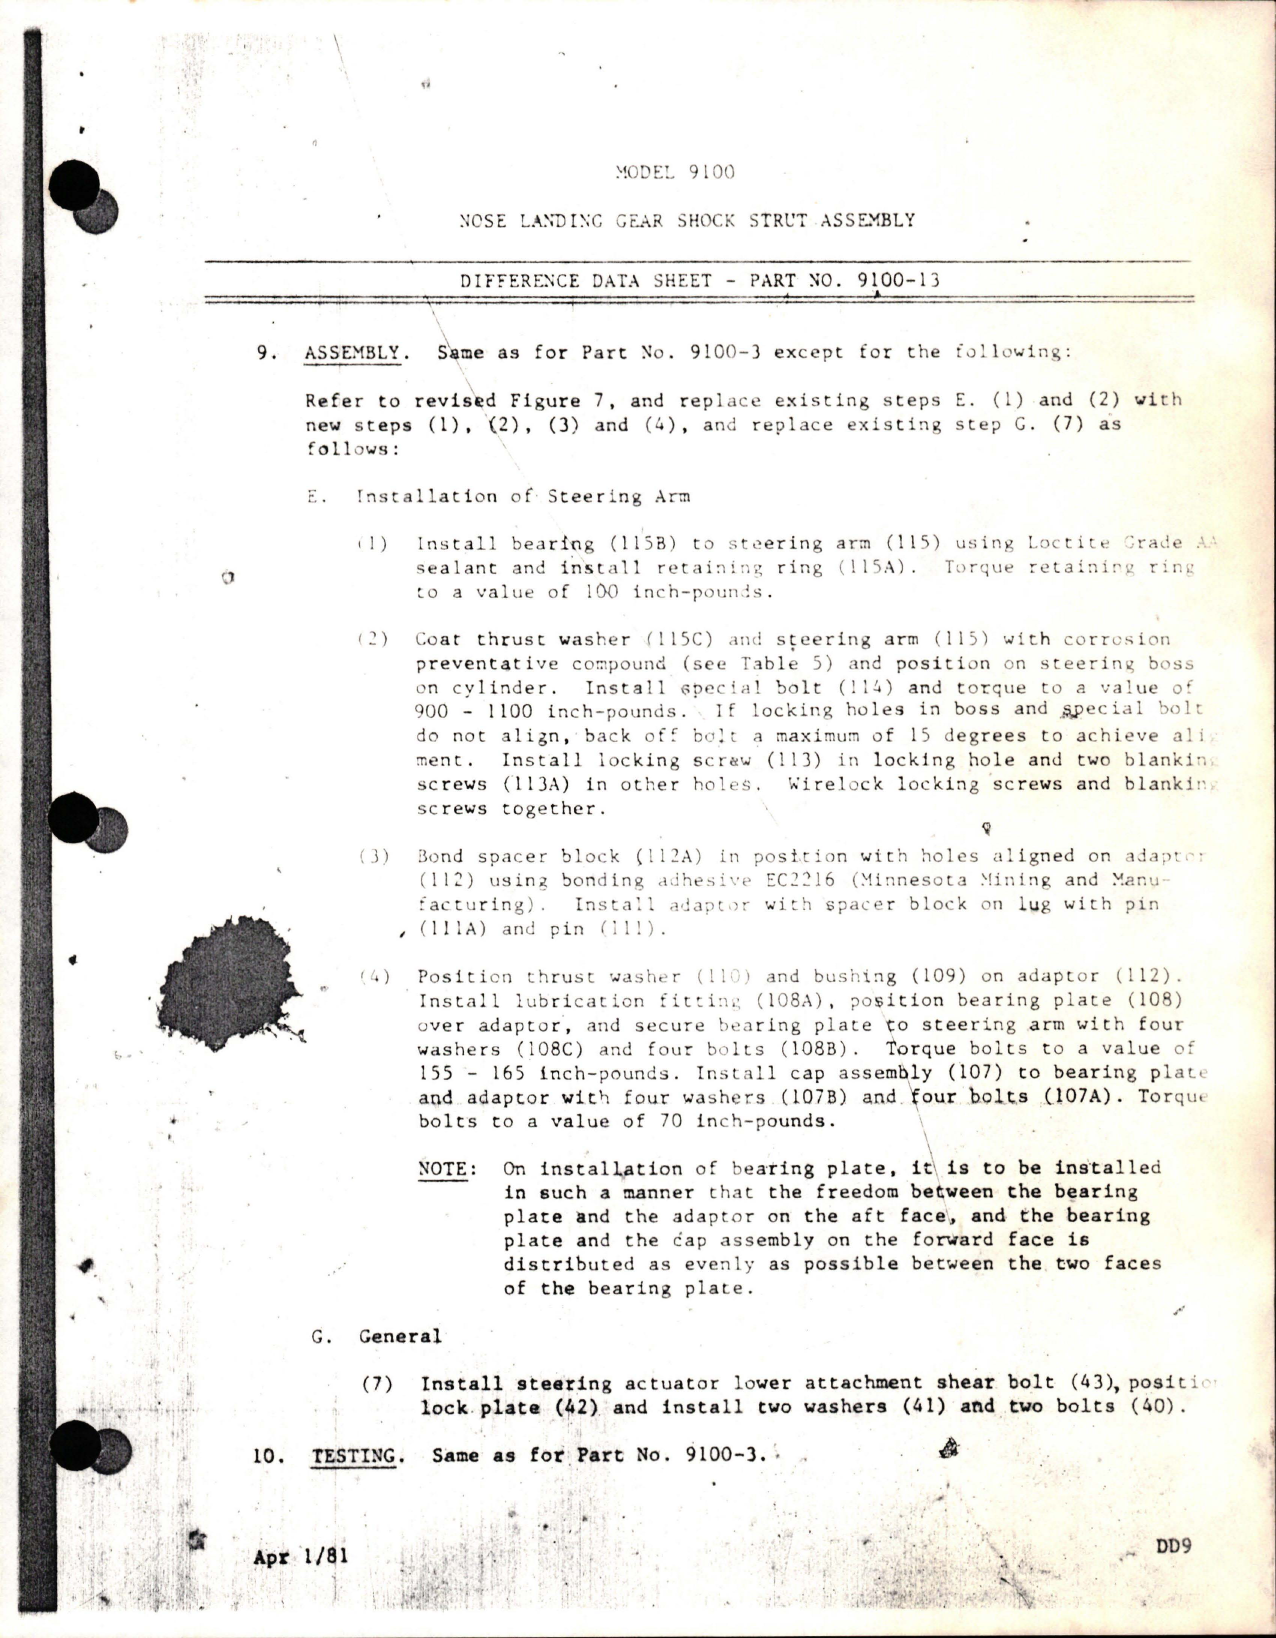 Sample page 5 from AirCorps Library document: Difference Data Sheet for Nose Landing Gear Shock Strut Assembly - Part 9100-13